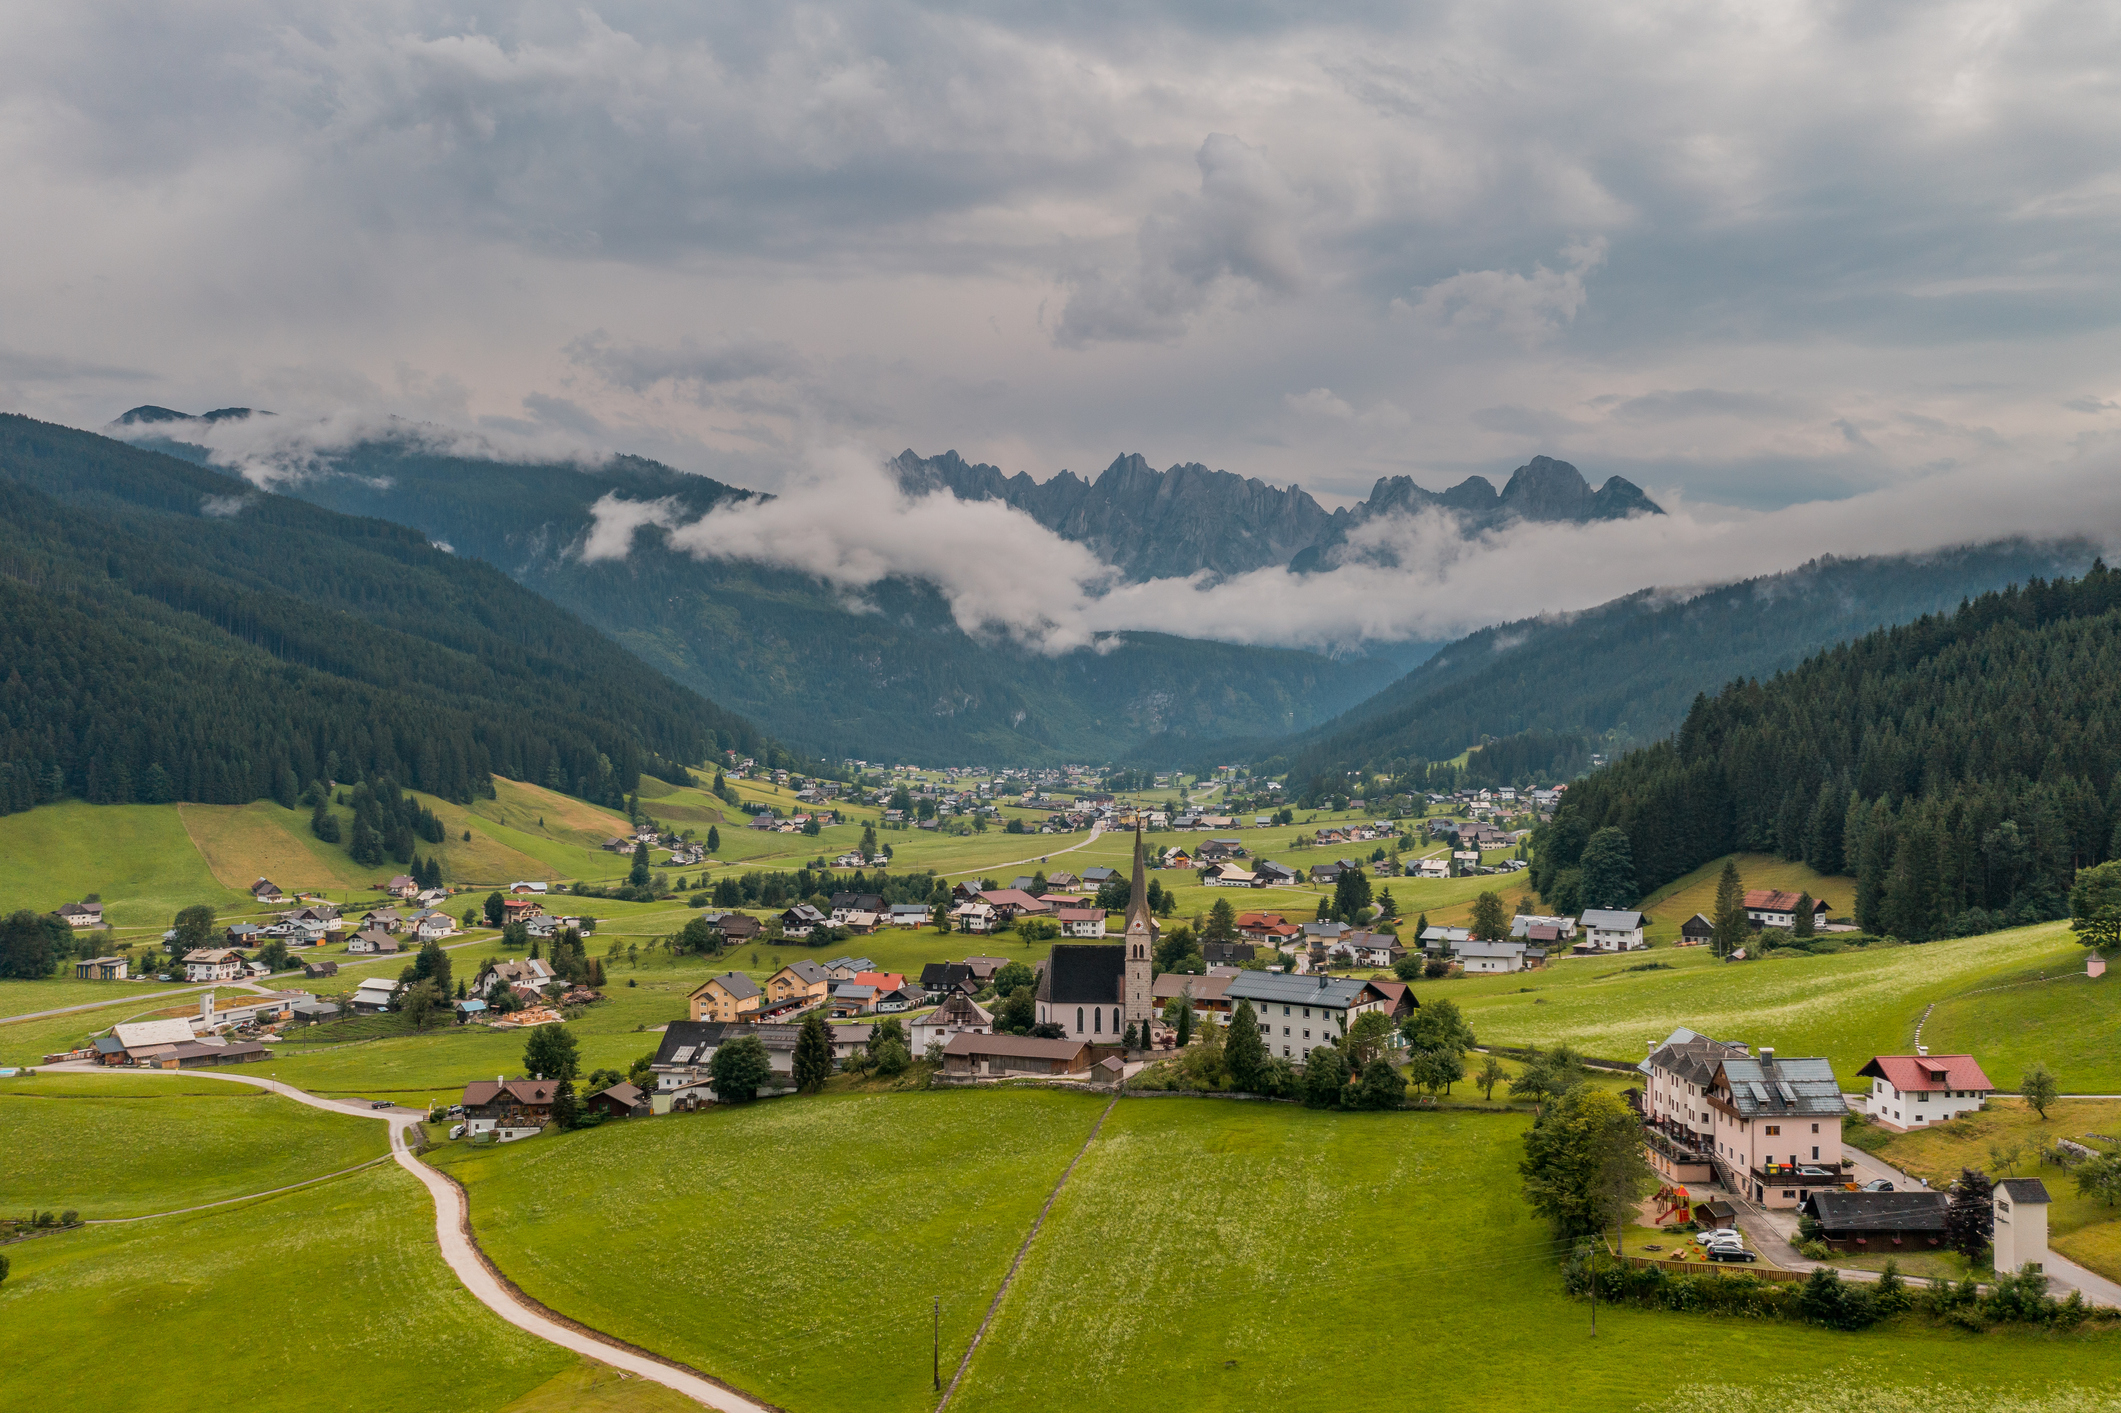 Aerial view of a village nestled in a valley with mountains partially obscured by clouds